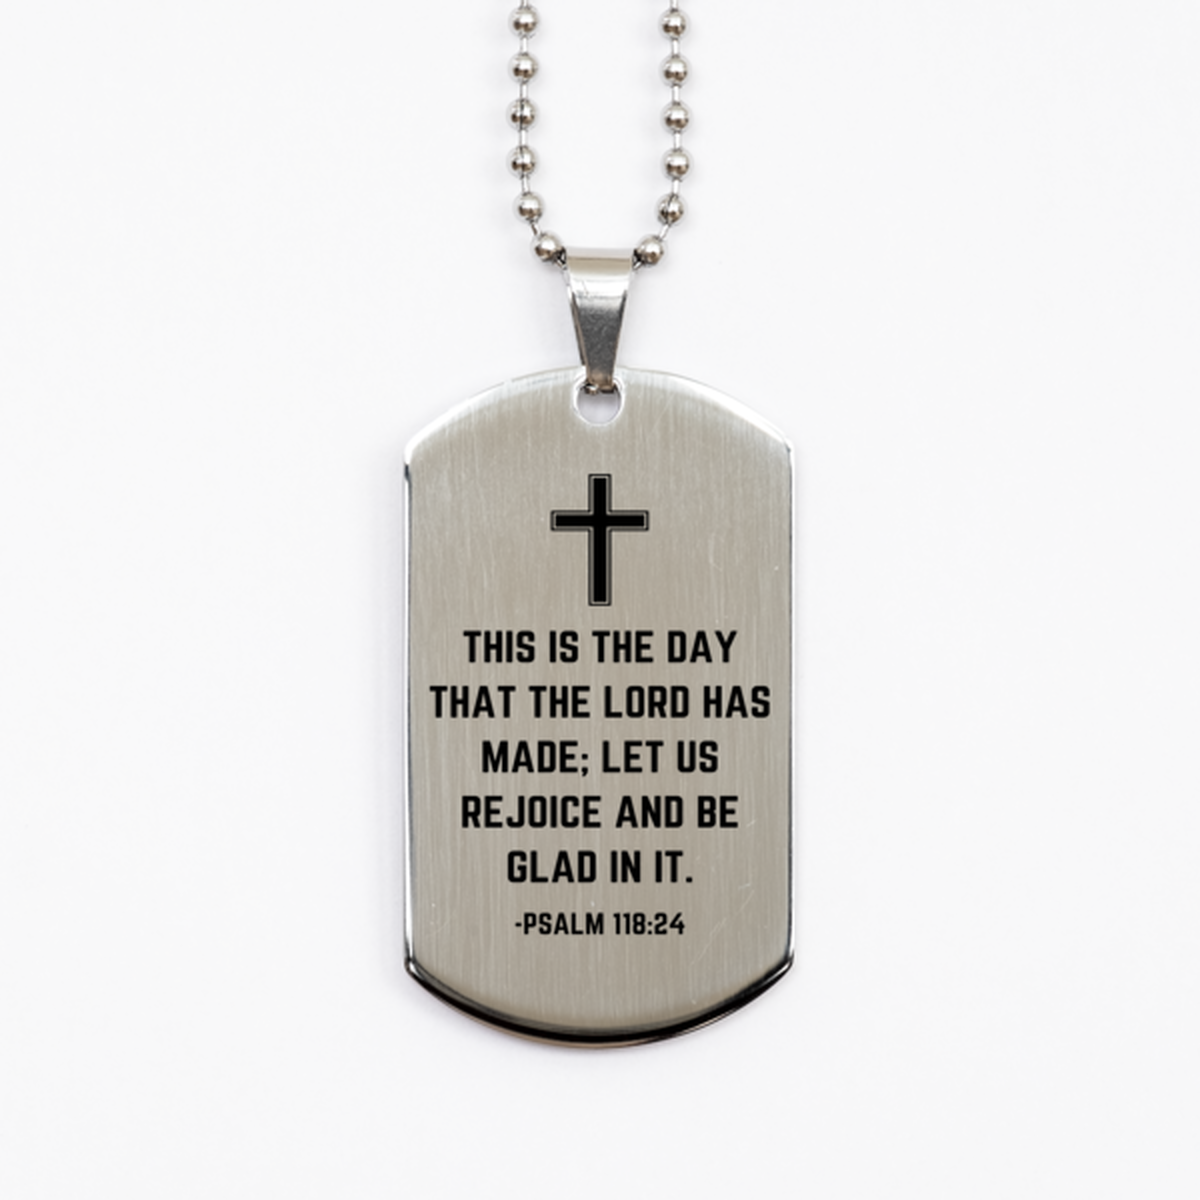 Baptism Gifts For Teenage Boys Girls, Christian Bible Verse Silver Dog Tag, This is the day that the lord has made, Confirmation Gifts, Bible Verse Necklace for Son, Godson, Grandson, Nephew